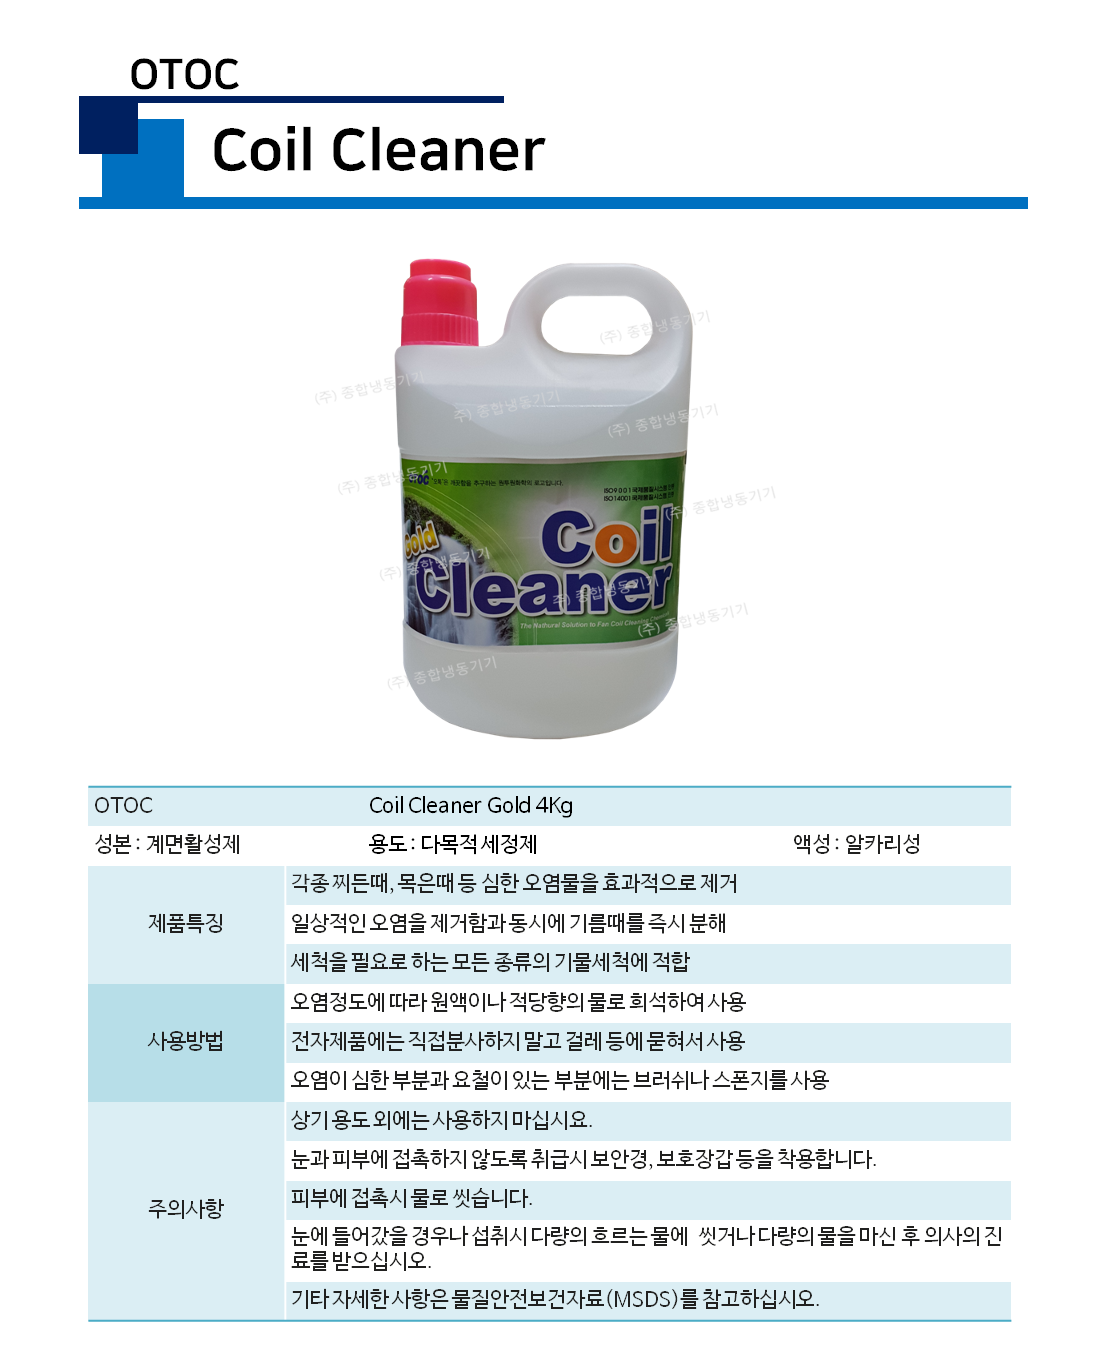 OTOC-Coil Cleaner Gold